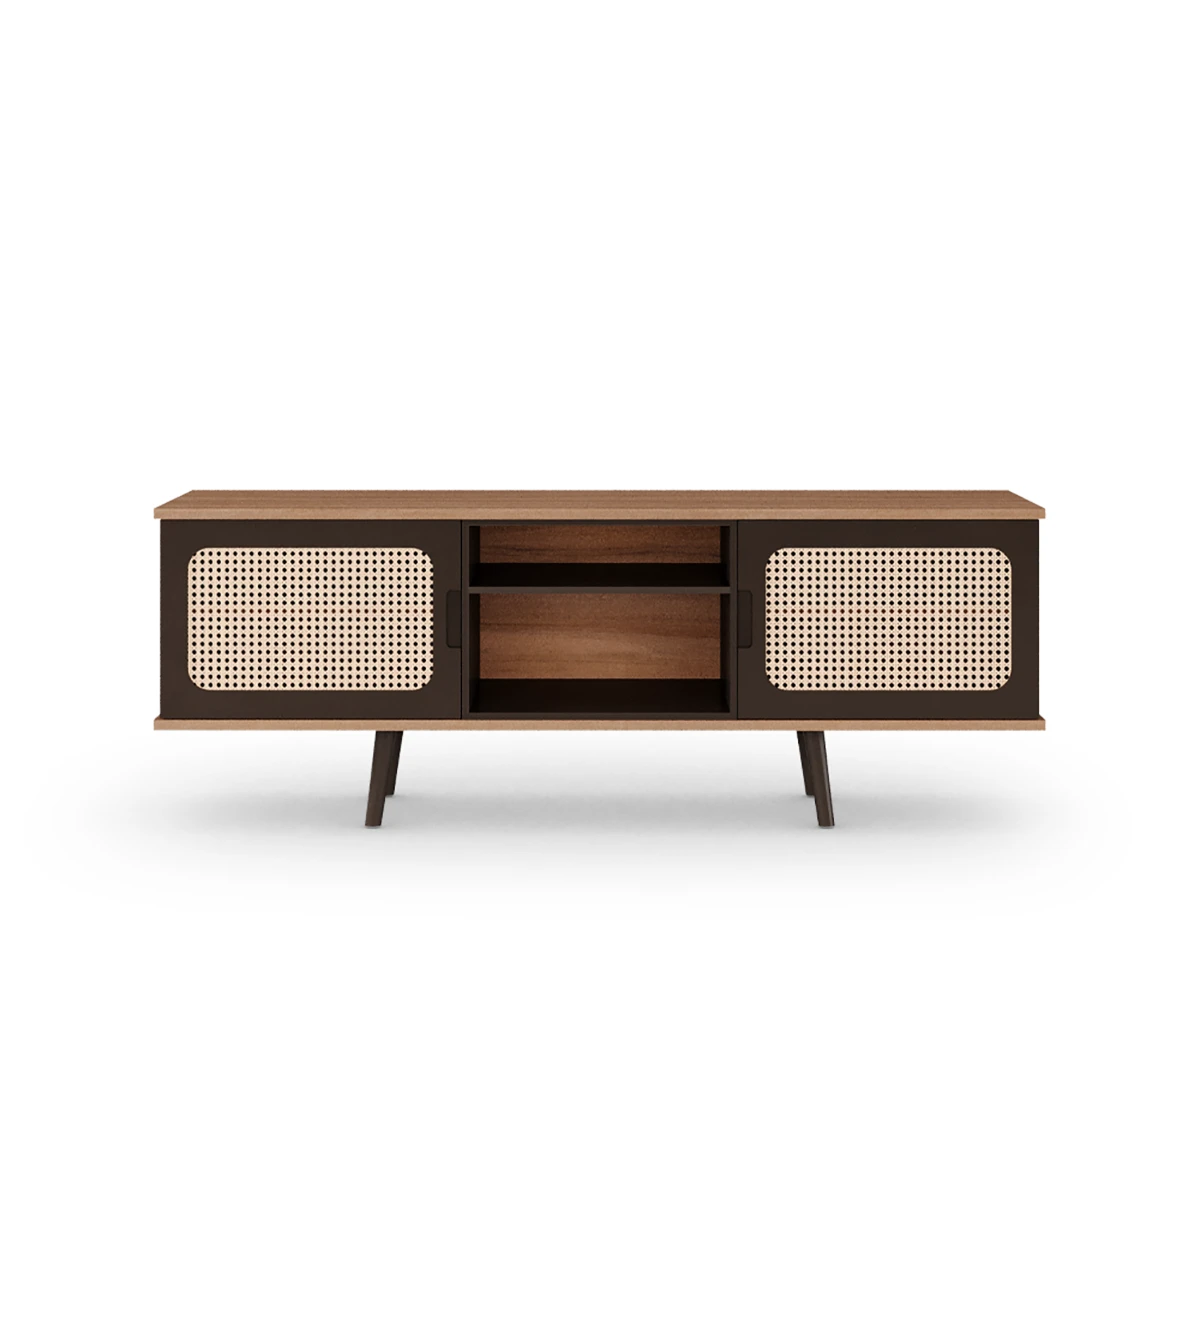 Malmo TV stand 2 doors, rattan detail, dark brown lacquered module and feet, walnut structure, 160 x 58,8 cm.